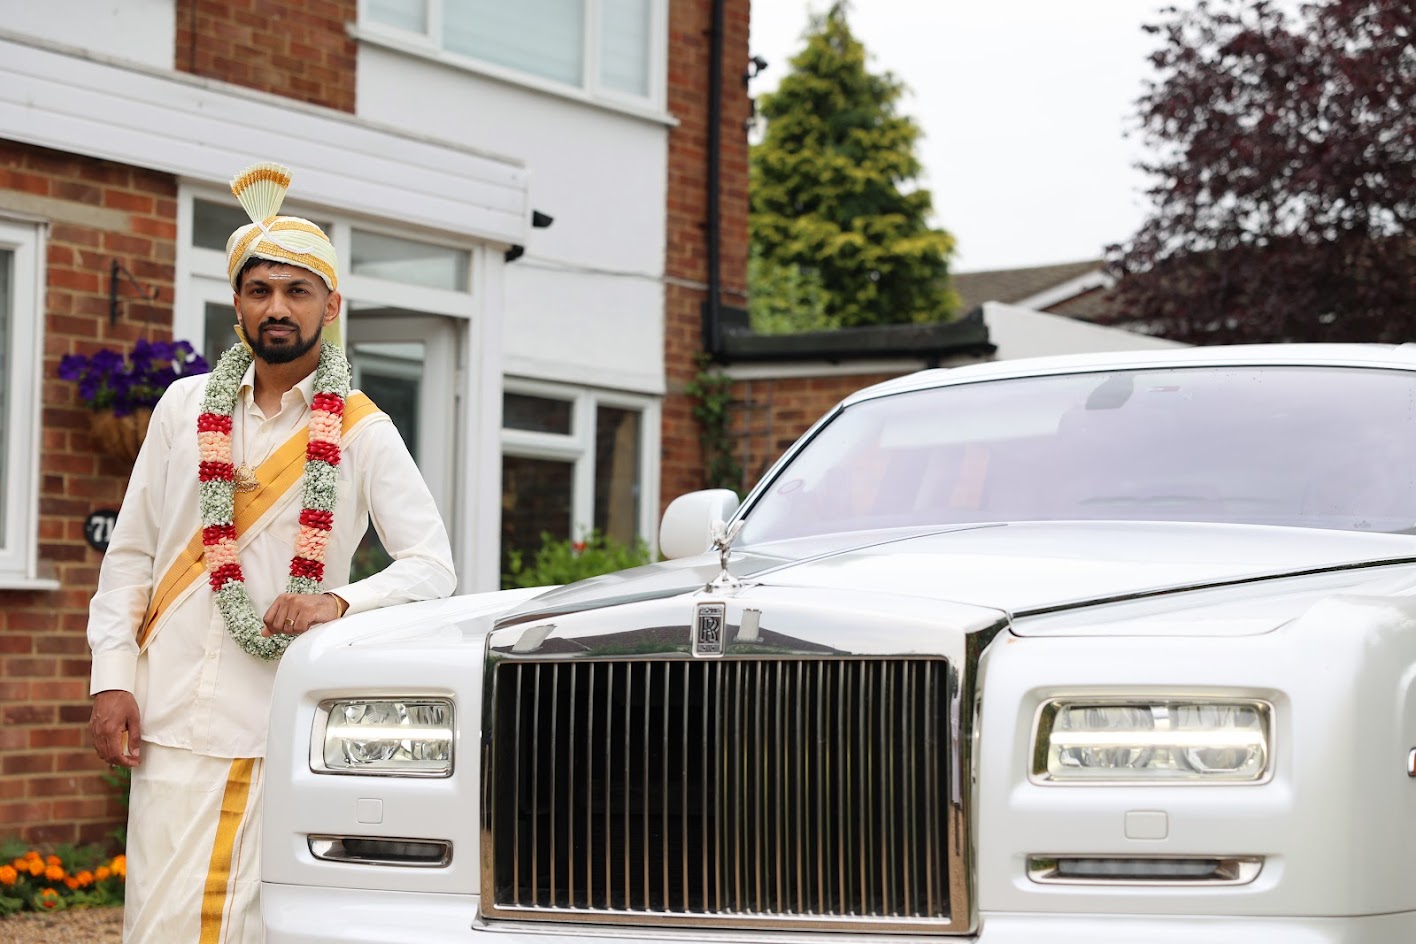 Tamil Groom in wedding outfit next to Rolls Royce